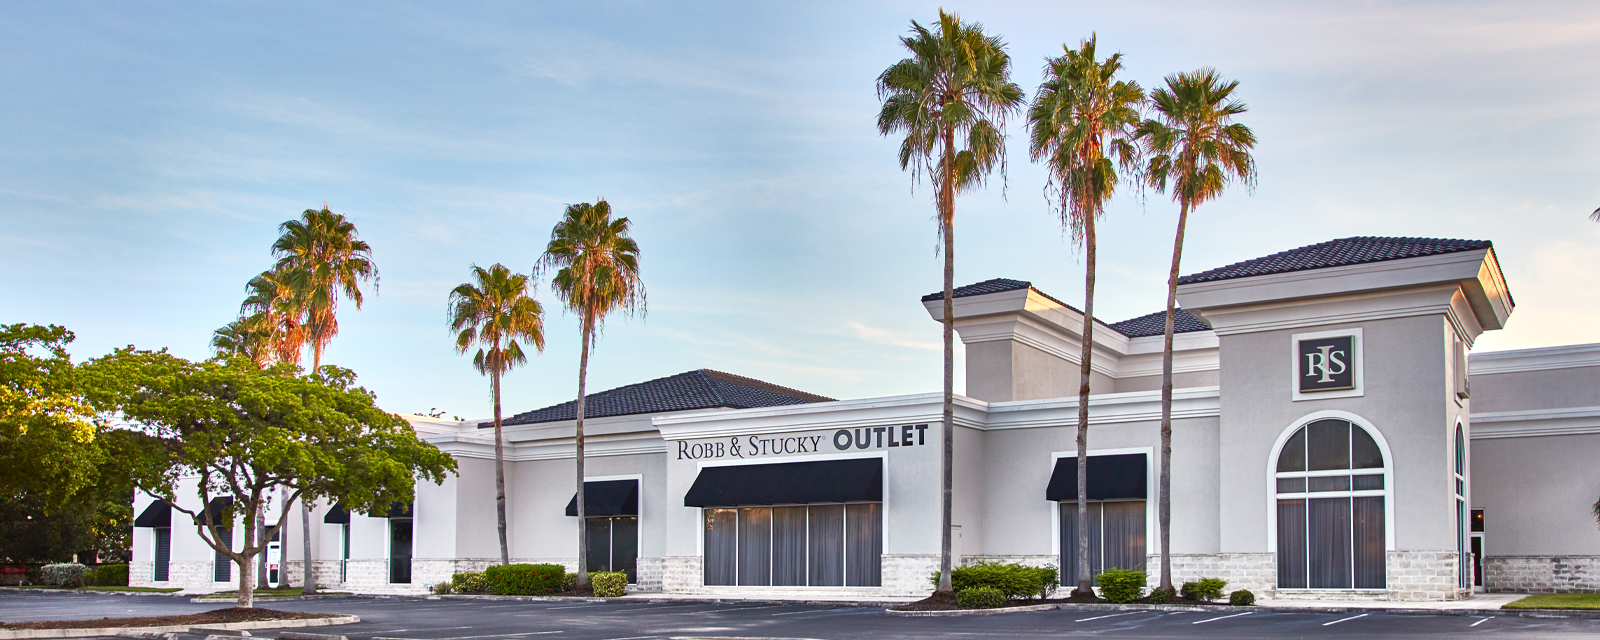 Robb & Stucky Outlet